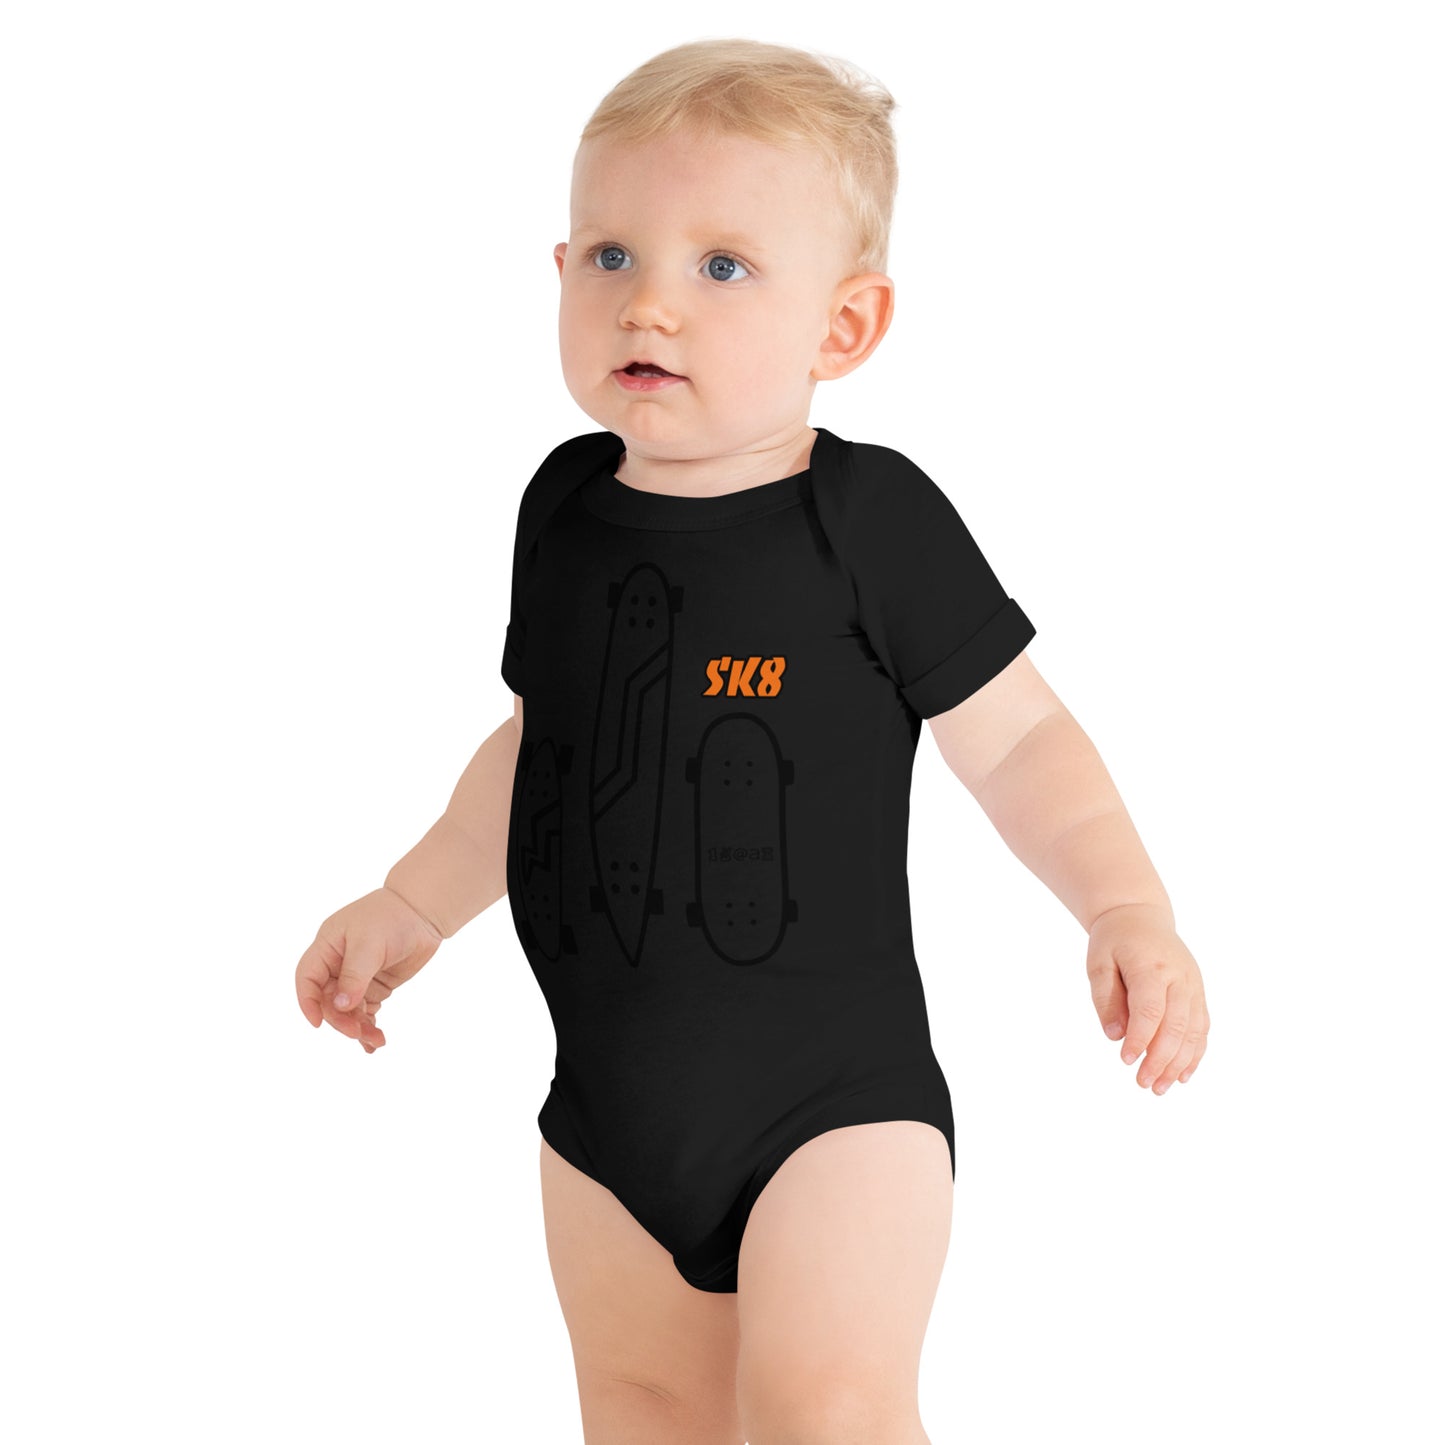 Baby short sleeve one piece "SK8"